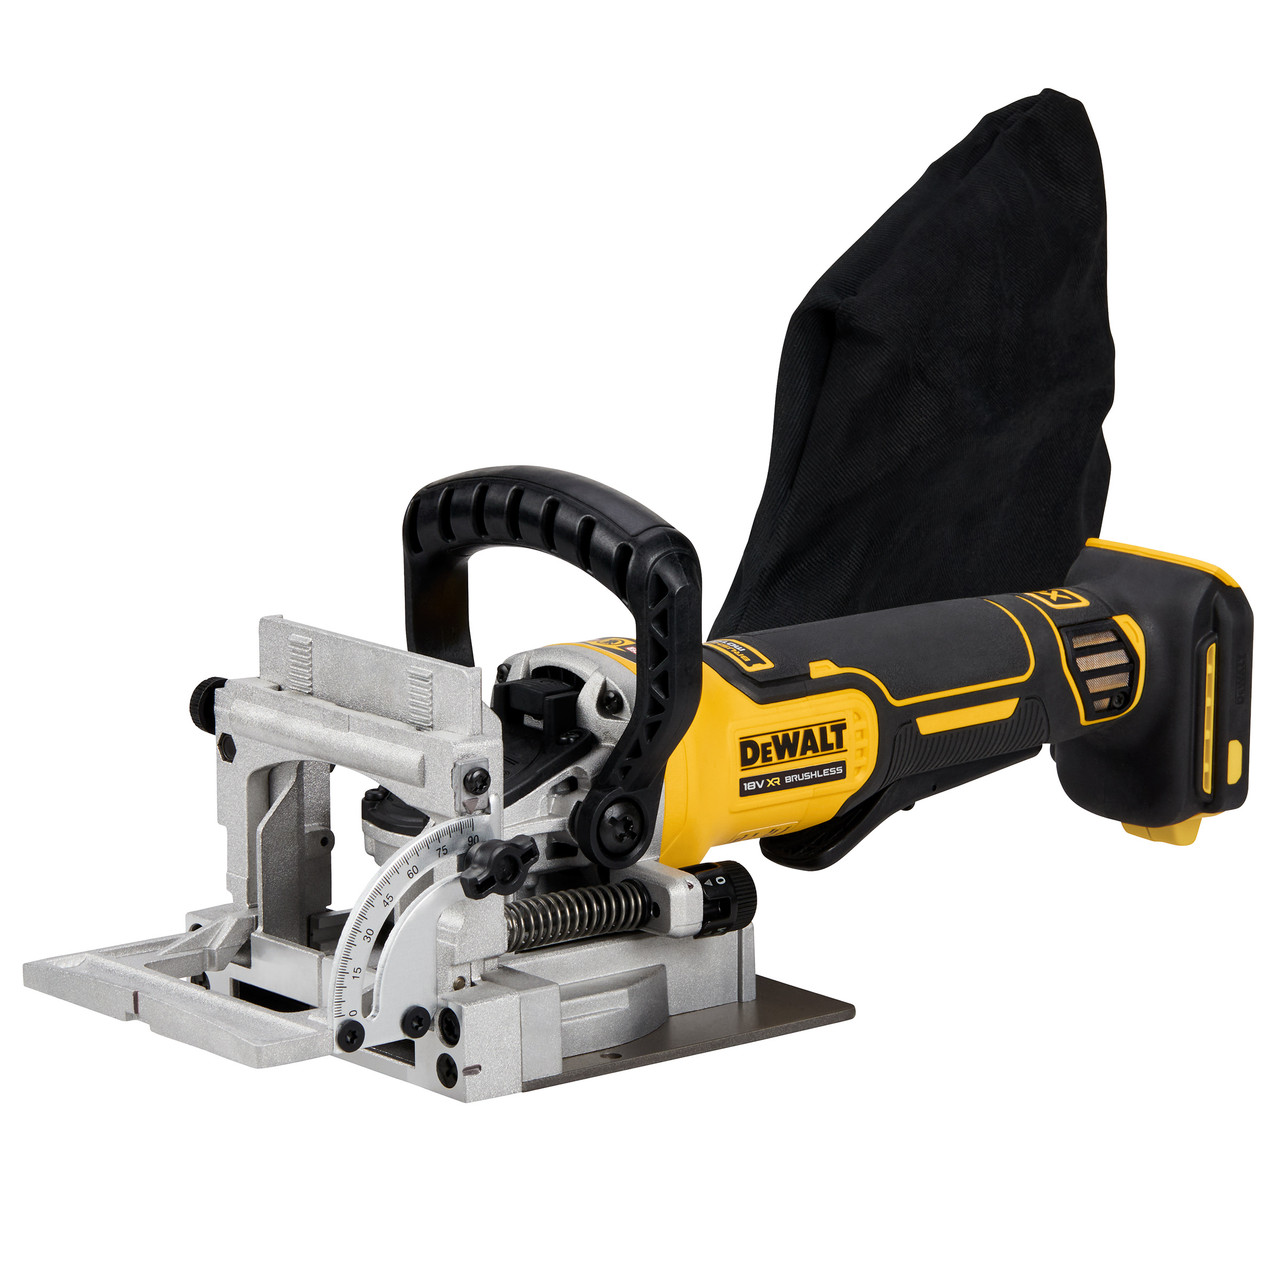 What is a Biscuit Jointer? - Toolstop